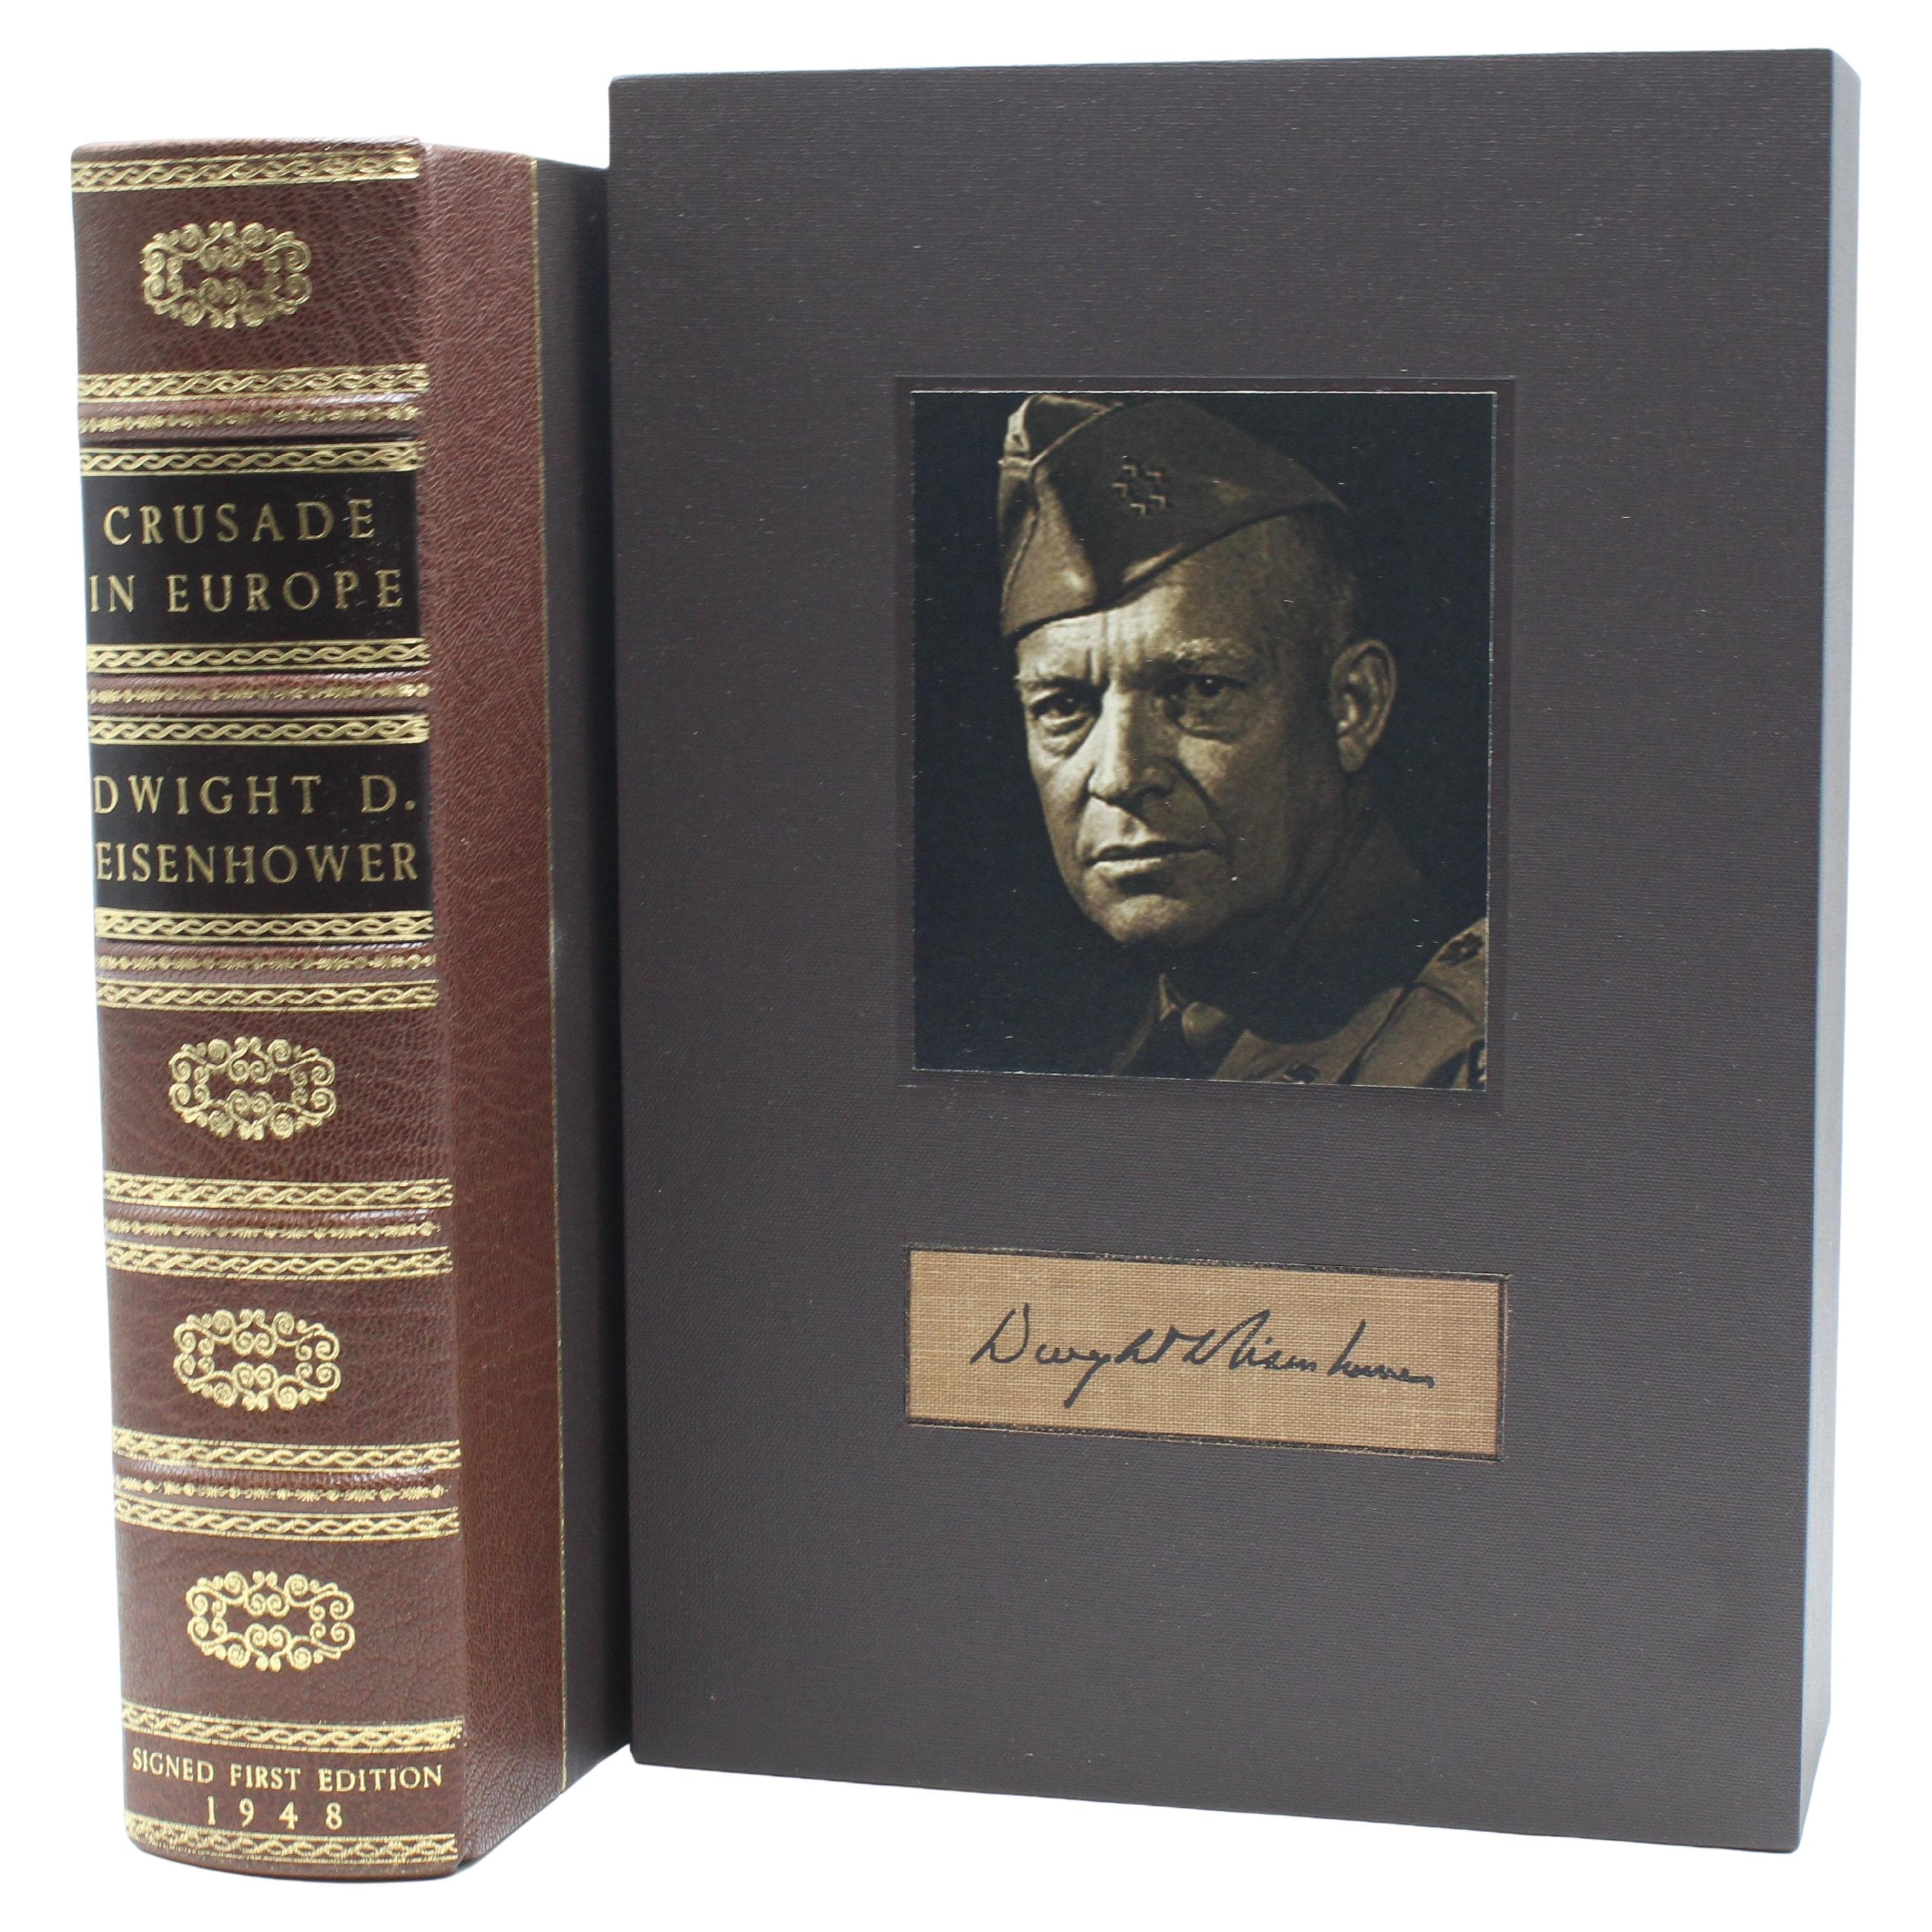 Crusade in Europe by Dwight D. Eisenhower, First Edition, Signed and Inscribed